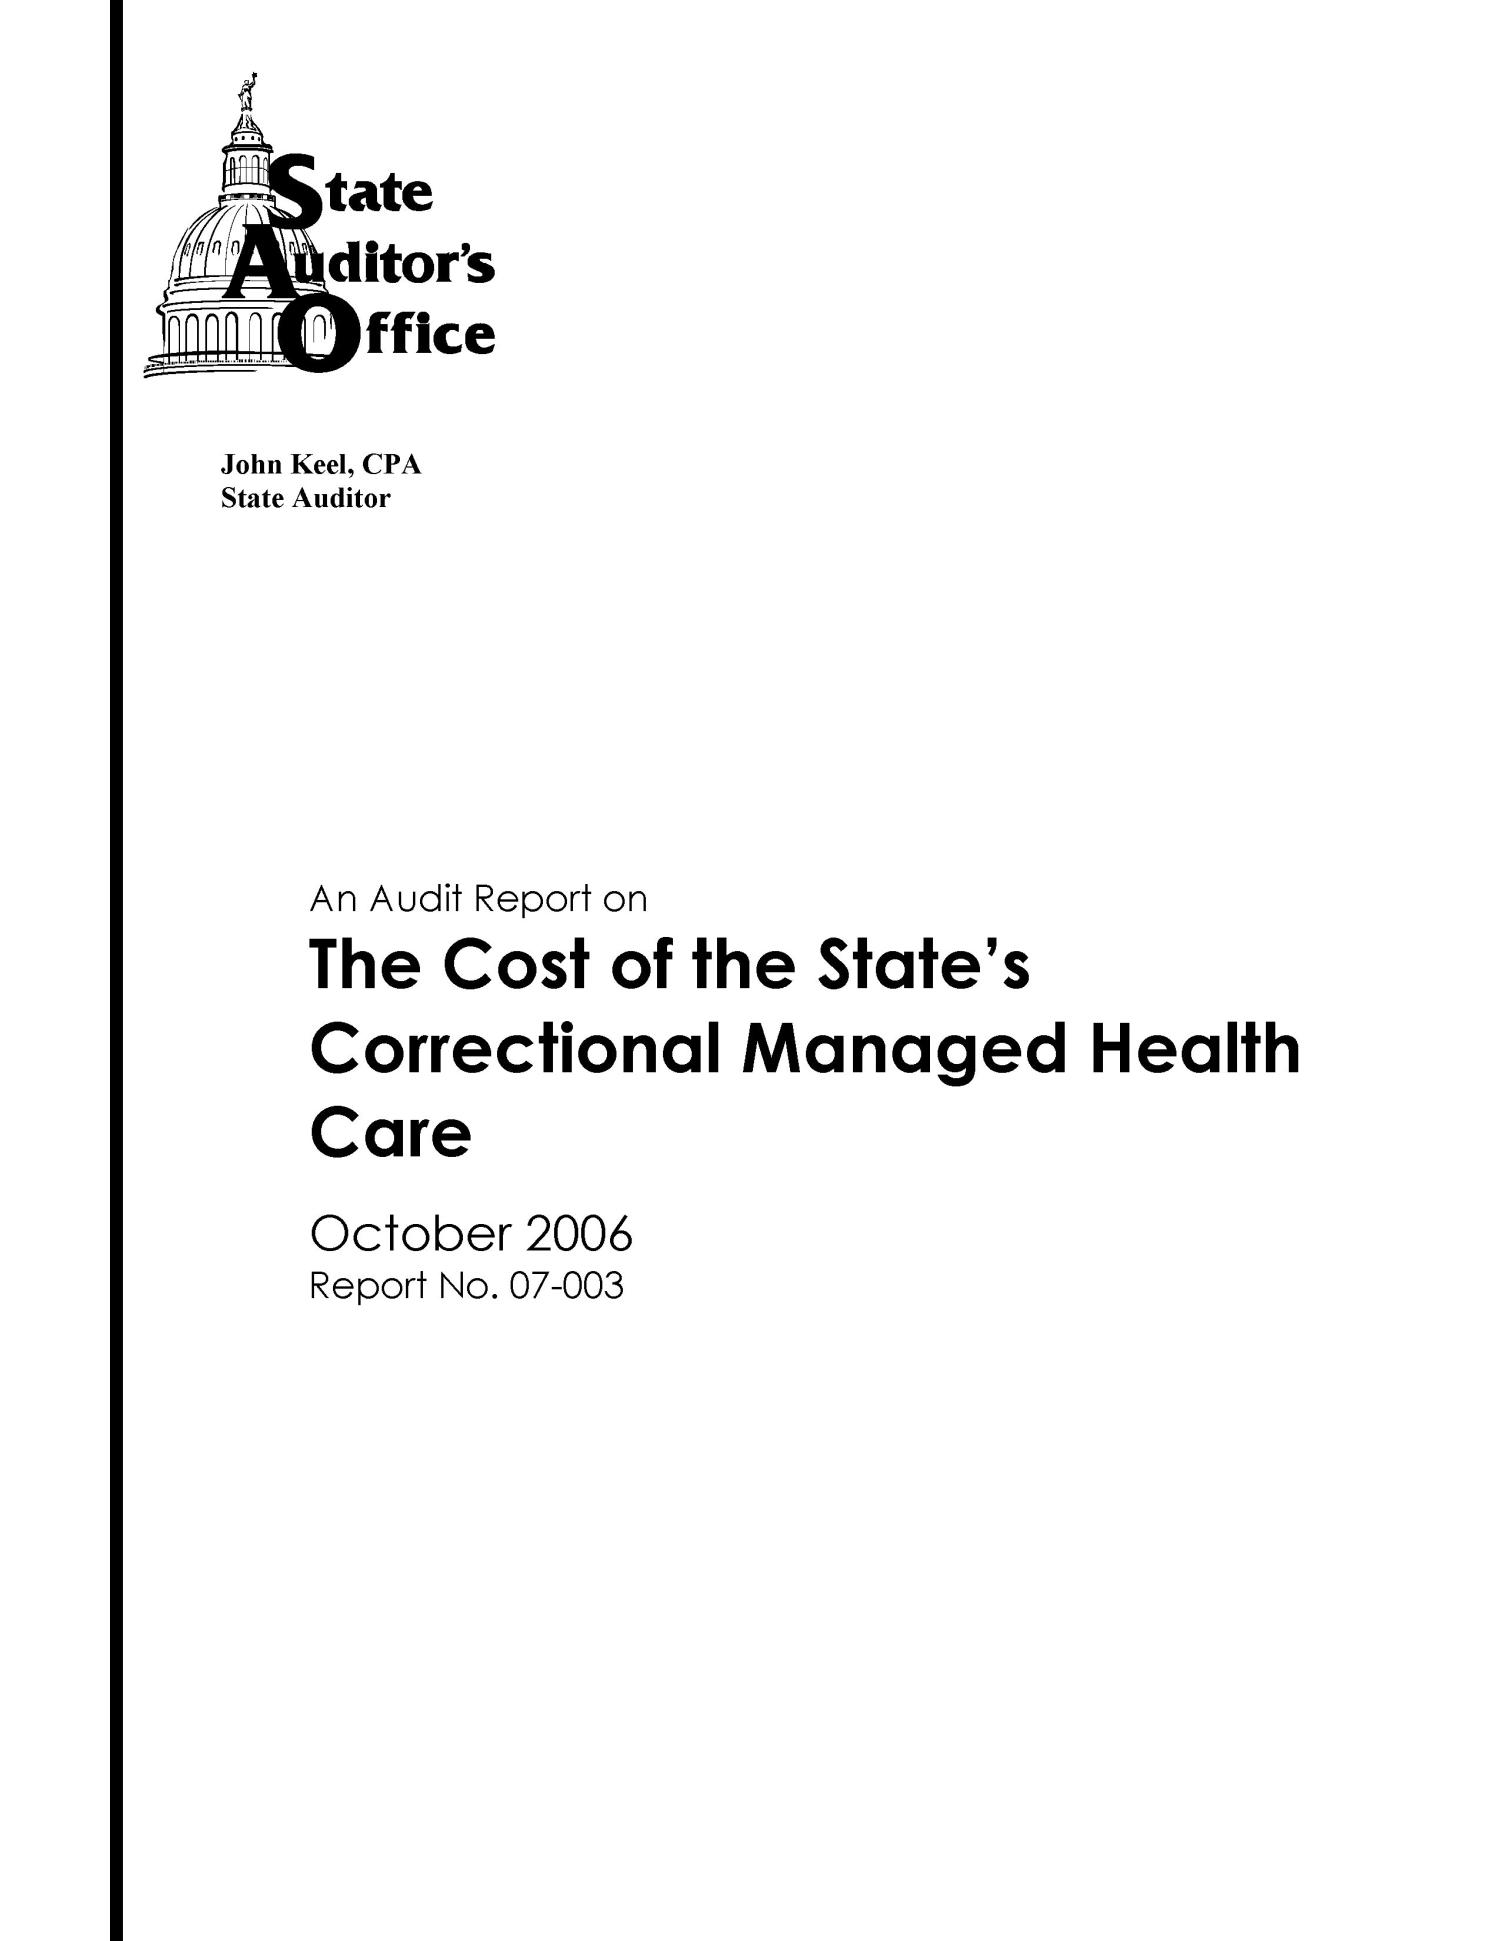 An Audit Report on the Cost of the State's Correctional Managed Health Care
                                                
                                                    [Sequence #]: 1 of 34
                                                